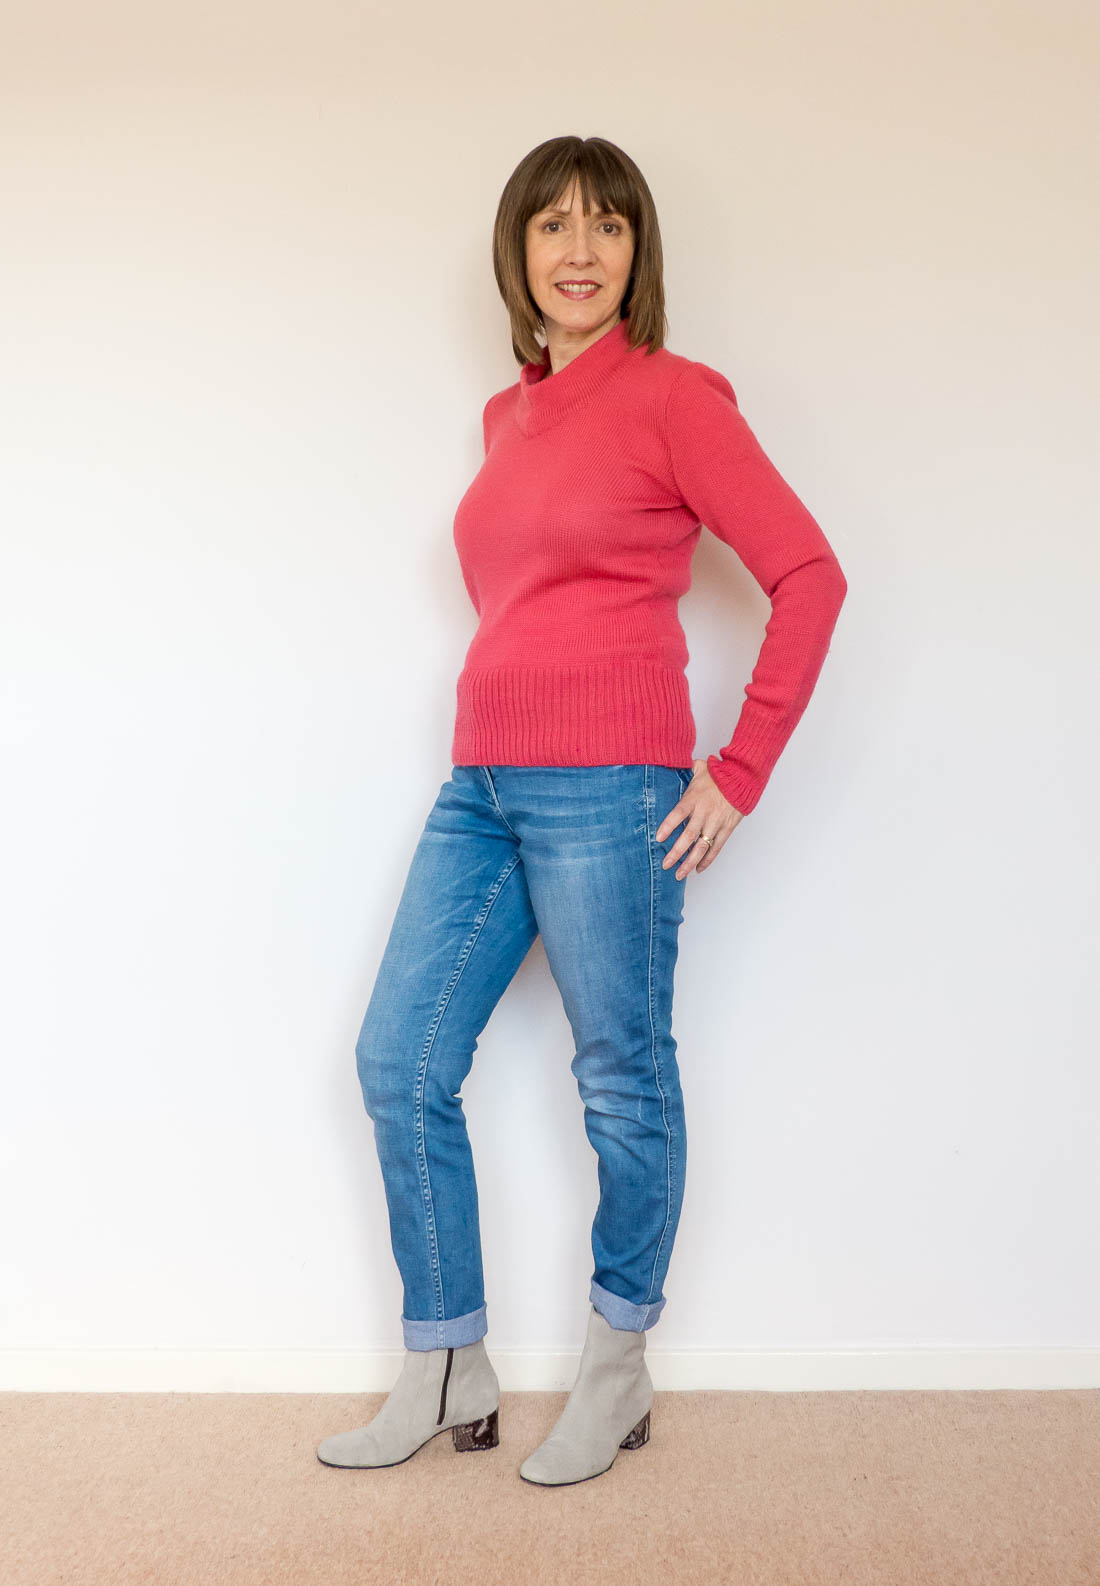 How I refashioned a sweater